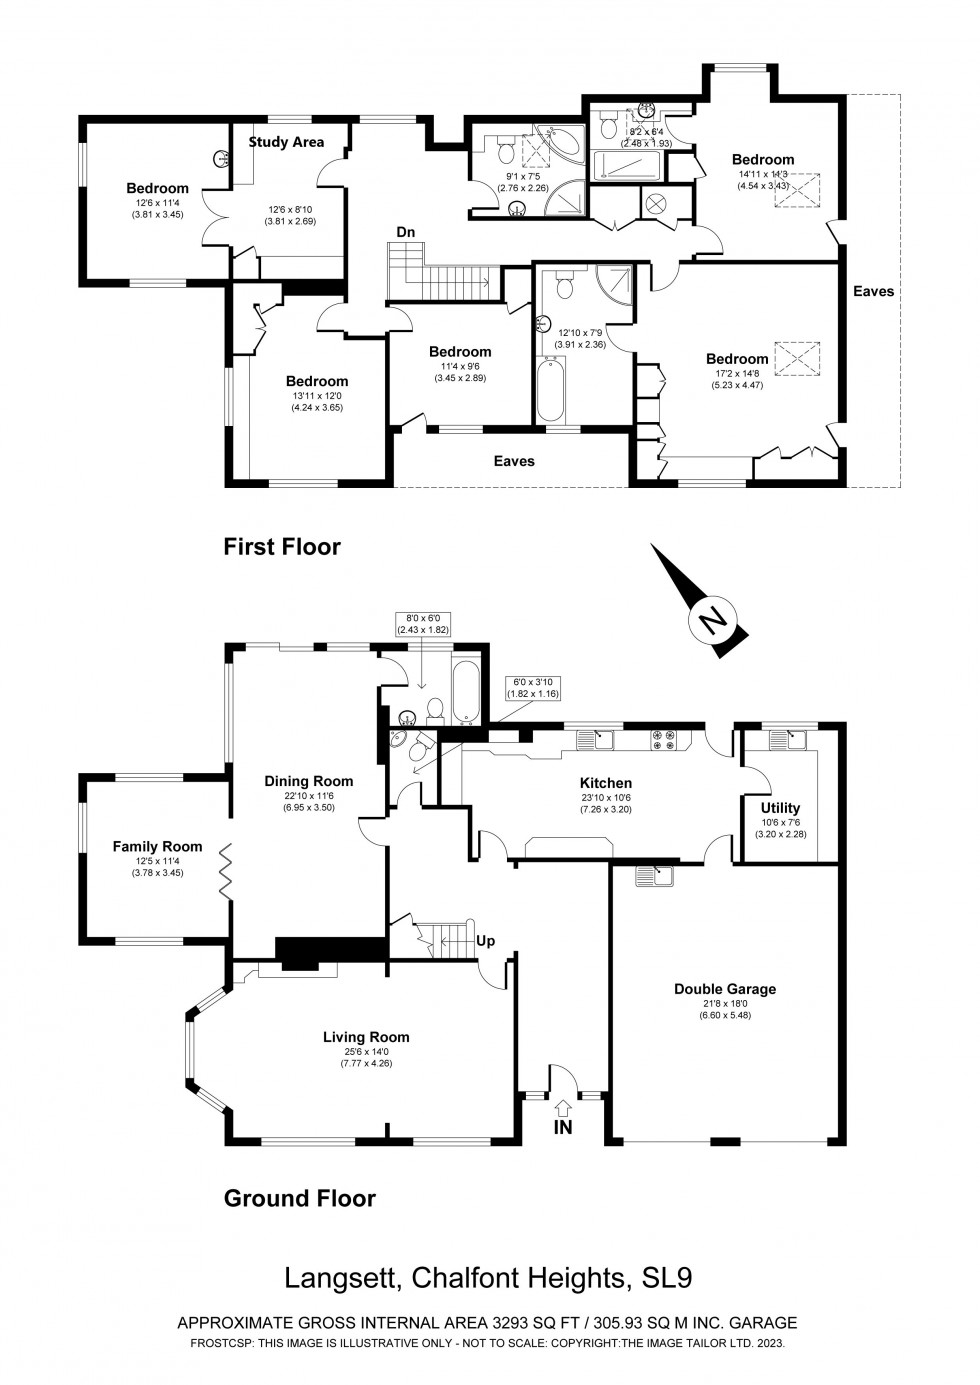 Floorplan for Woodside Hill, Chalfont Heights, SL9